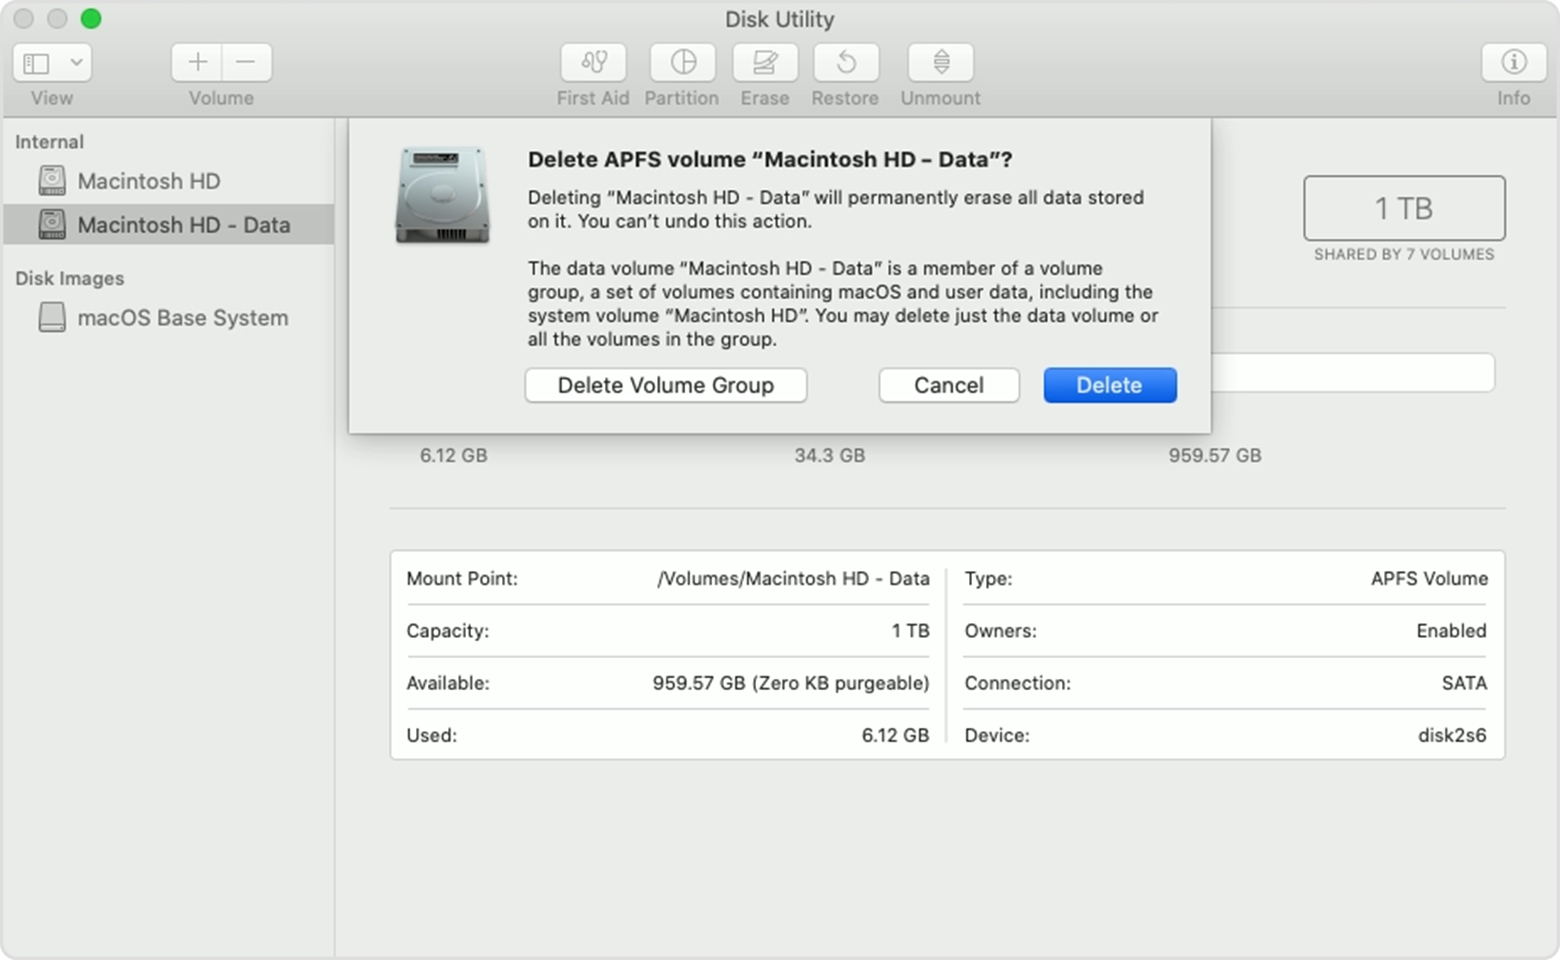 testdisk review for reformatted drive mac